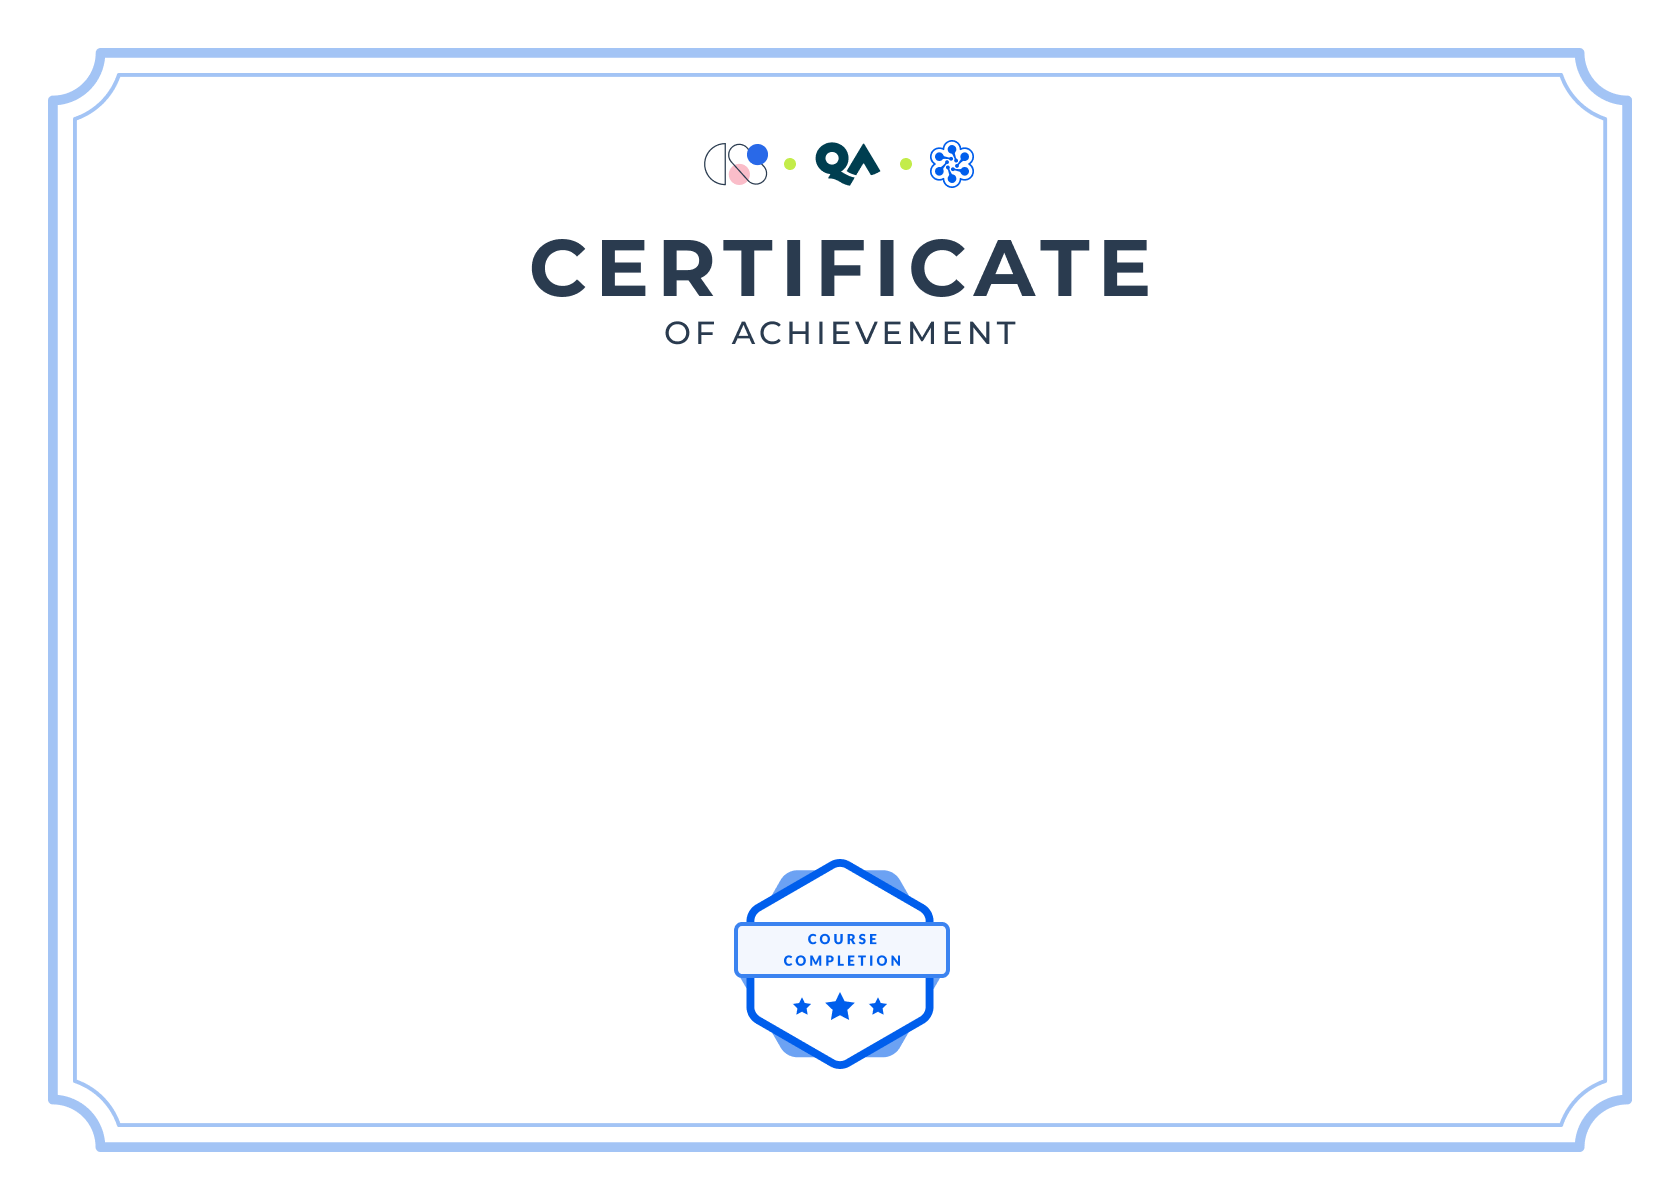 Your certificate for this learning path